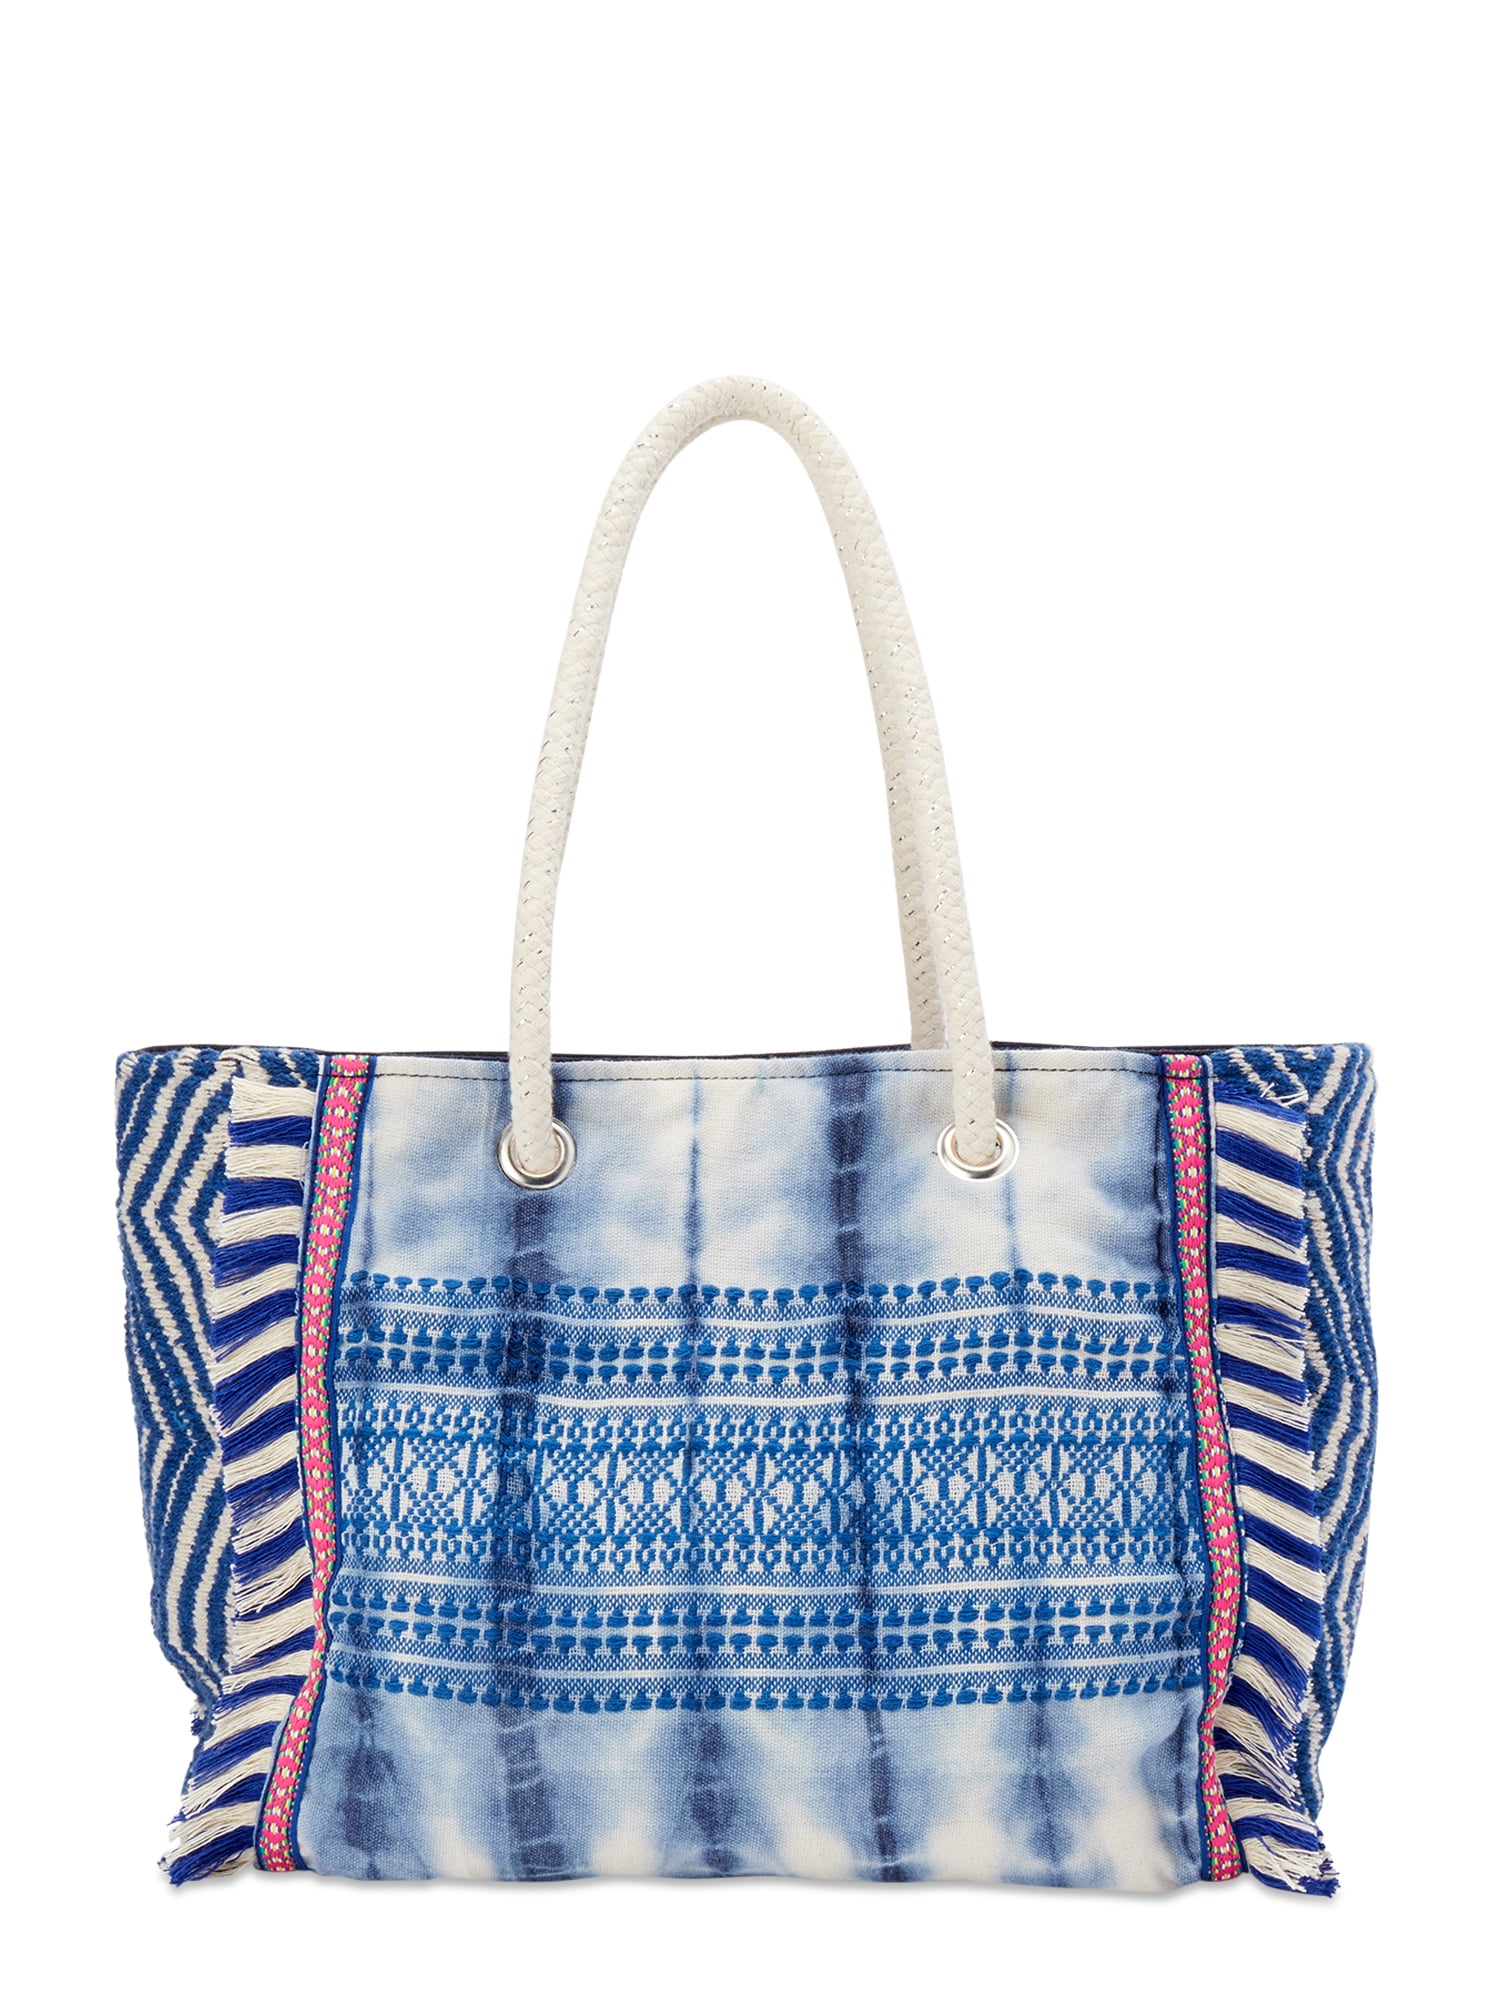 Twig & Arrow Tie Dye Boho Tote Bag with Exterior Fringe Accents ...